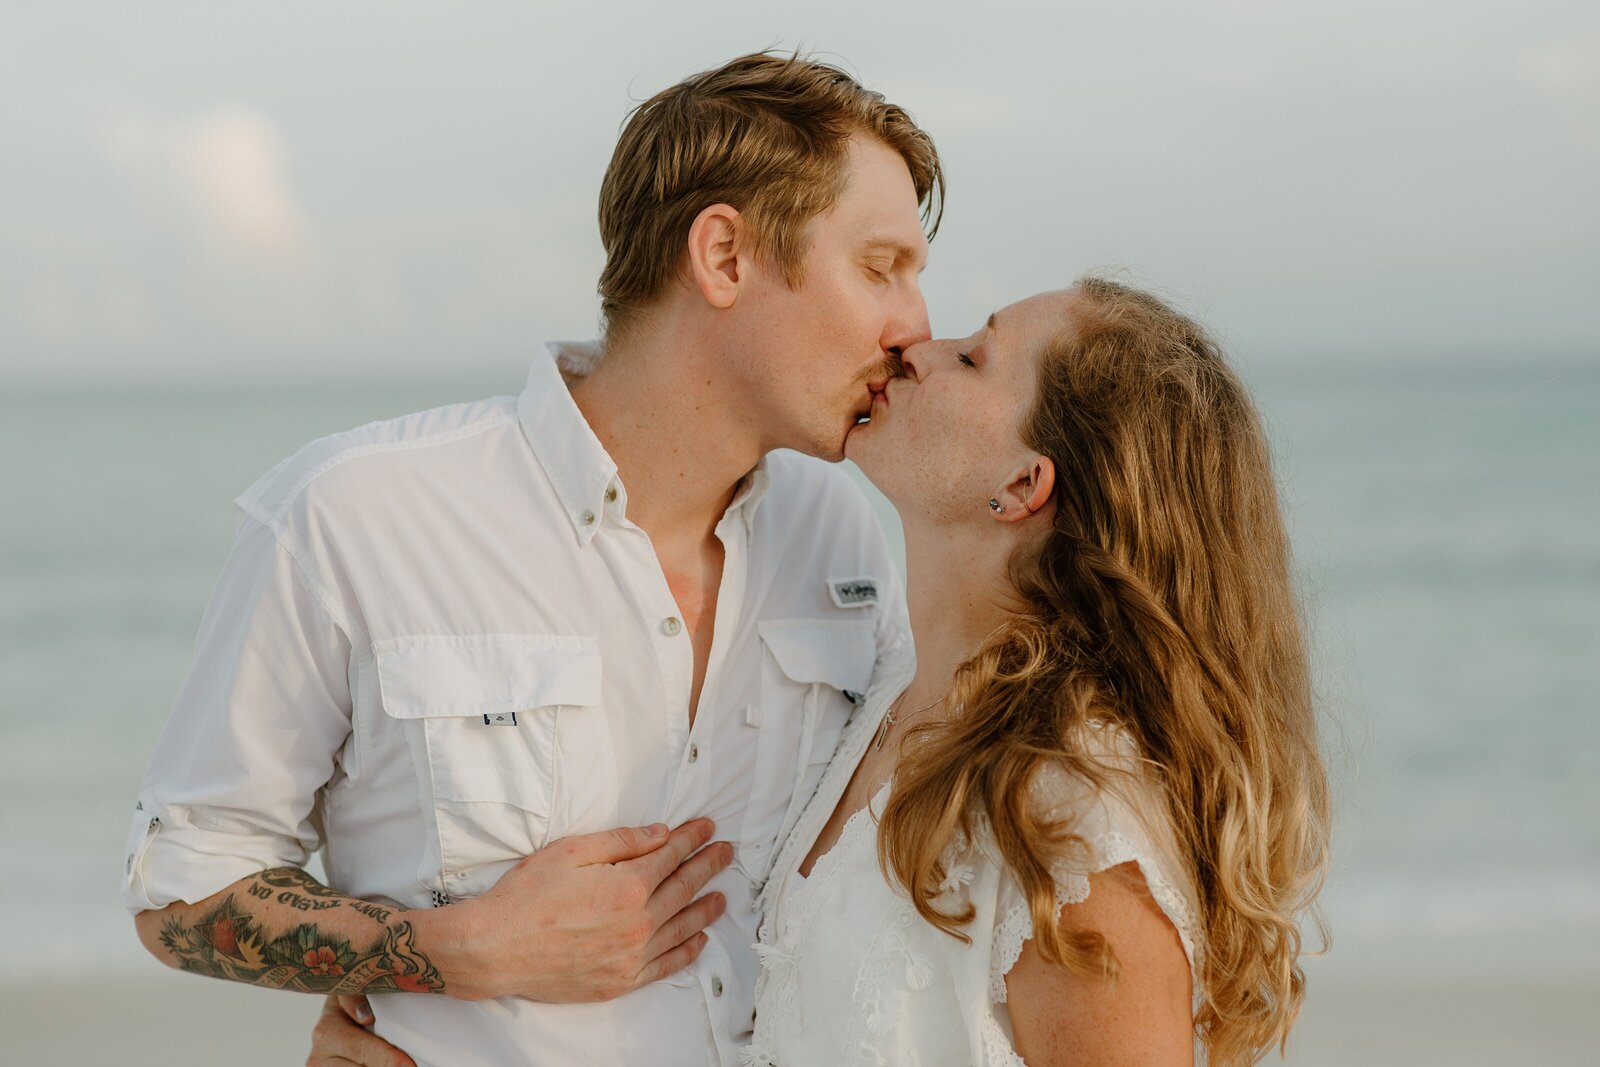 Pensacola Beach vacation family photography session .  Couple kissing  on the beach.